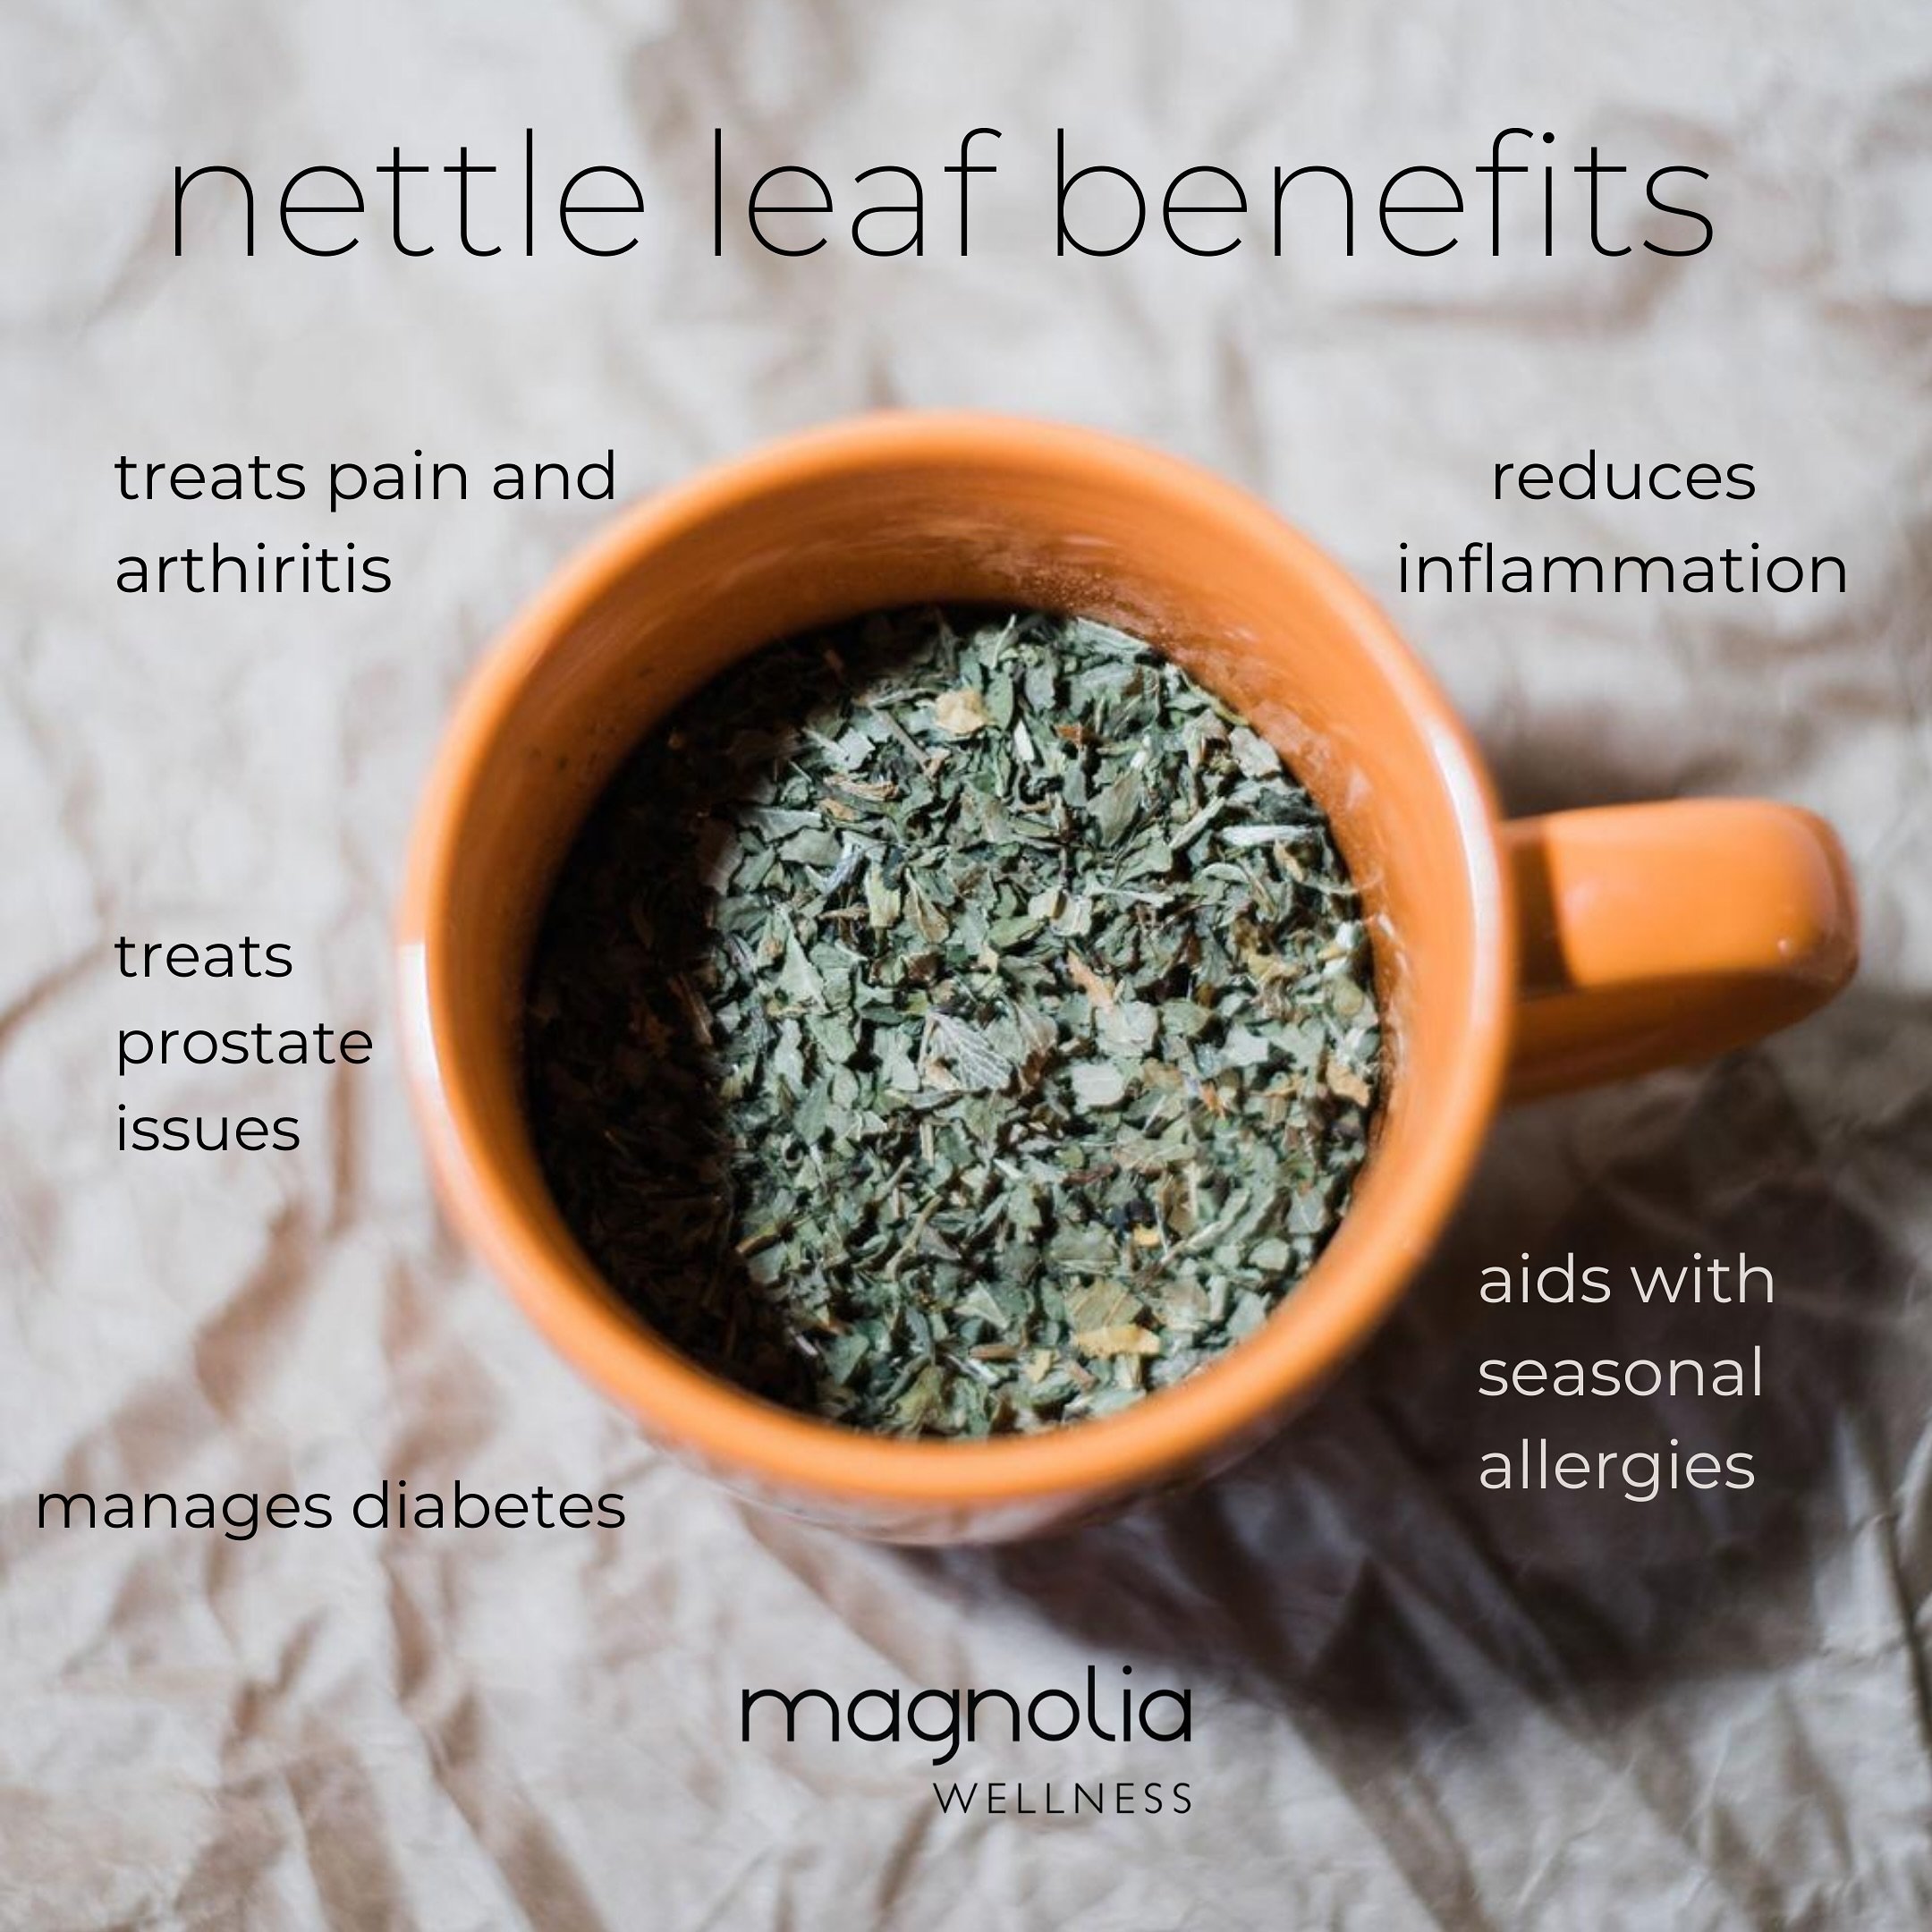 🌿 Dive into the natural goodness of nettle leaf! Here are some DIY tips to incorporate this powerhouse herb into your wellness routine:

1️⃣ Immune-Boosting Infusion
Brew a comforting cup of nettle leaf tea to give your immune system a boost. Simply